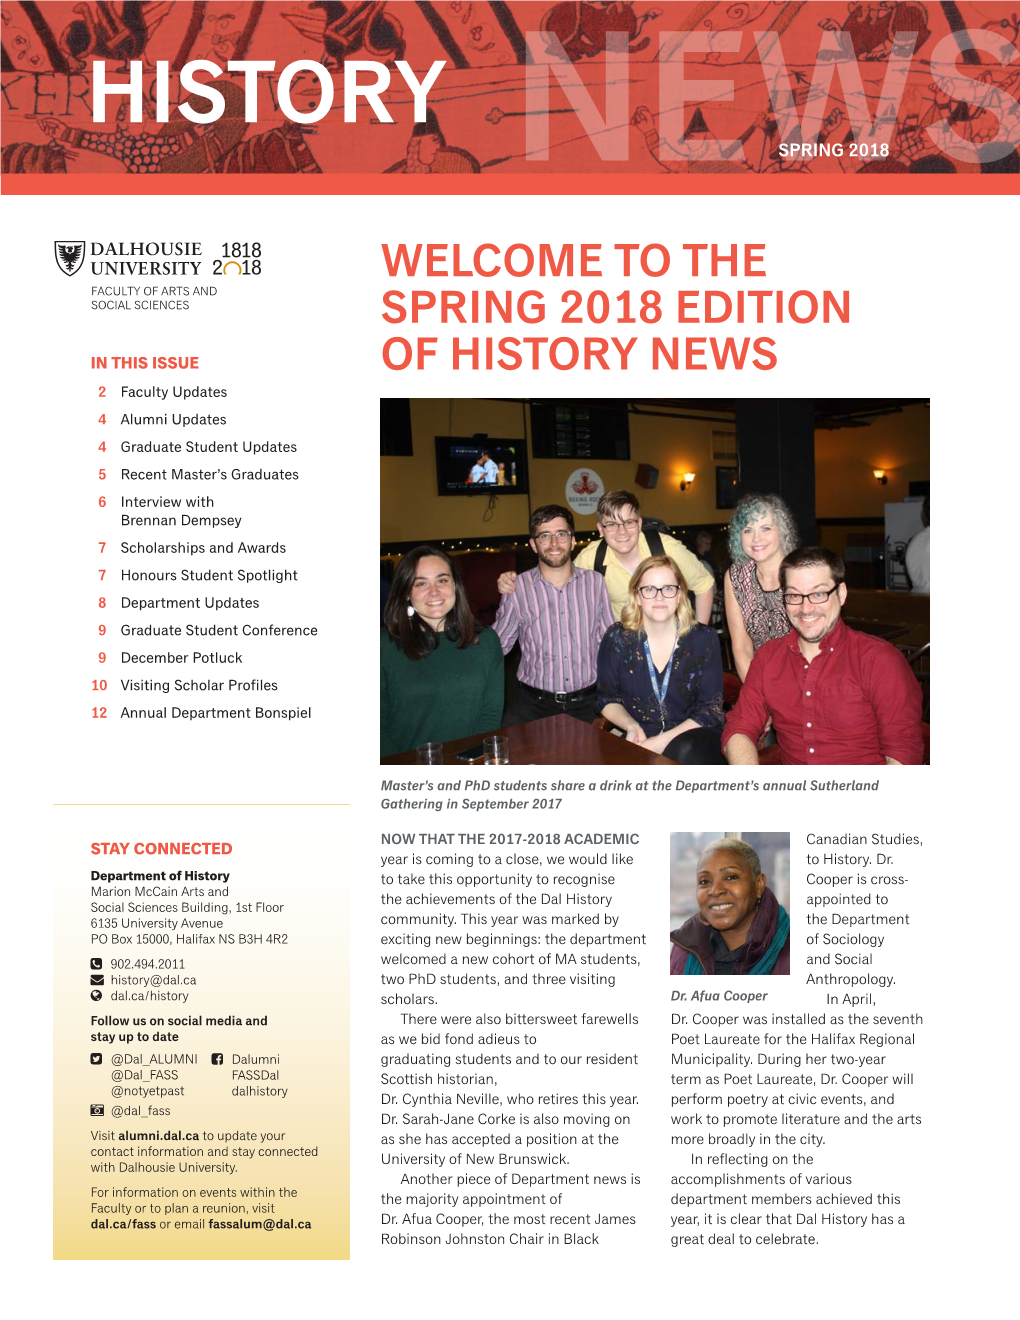 Welcome to the Spring 2018 Edition of History News